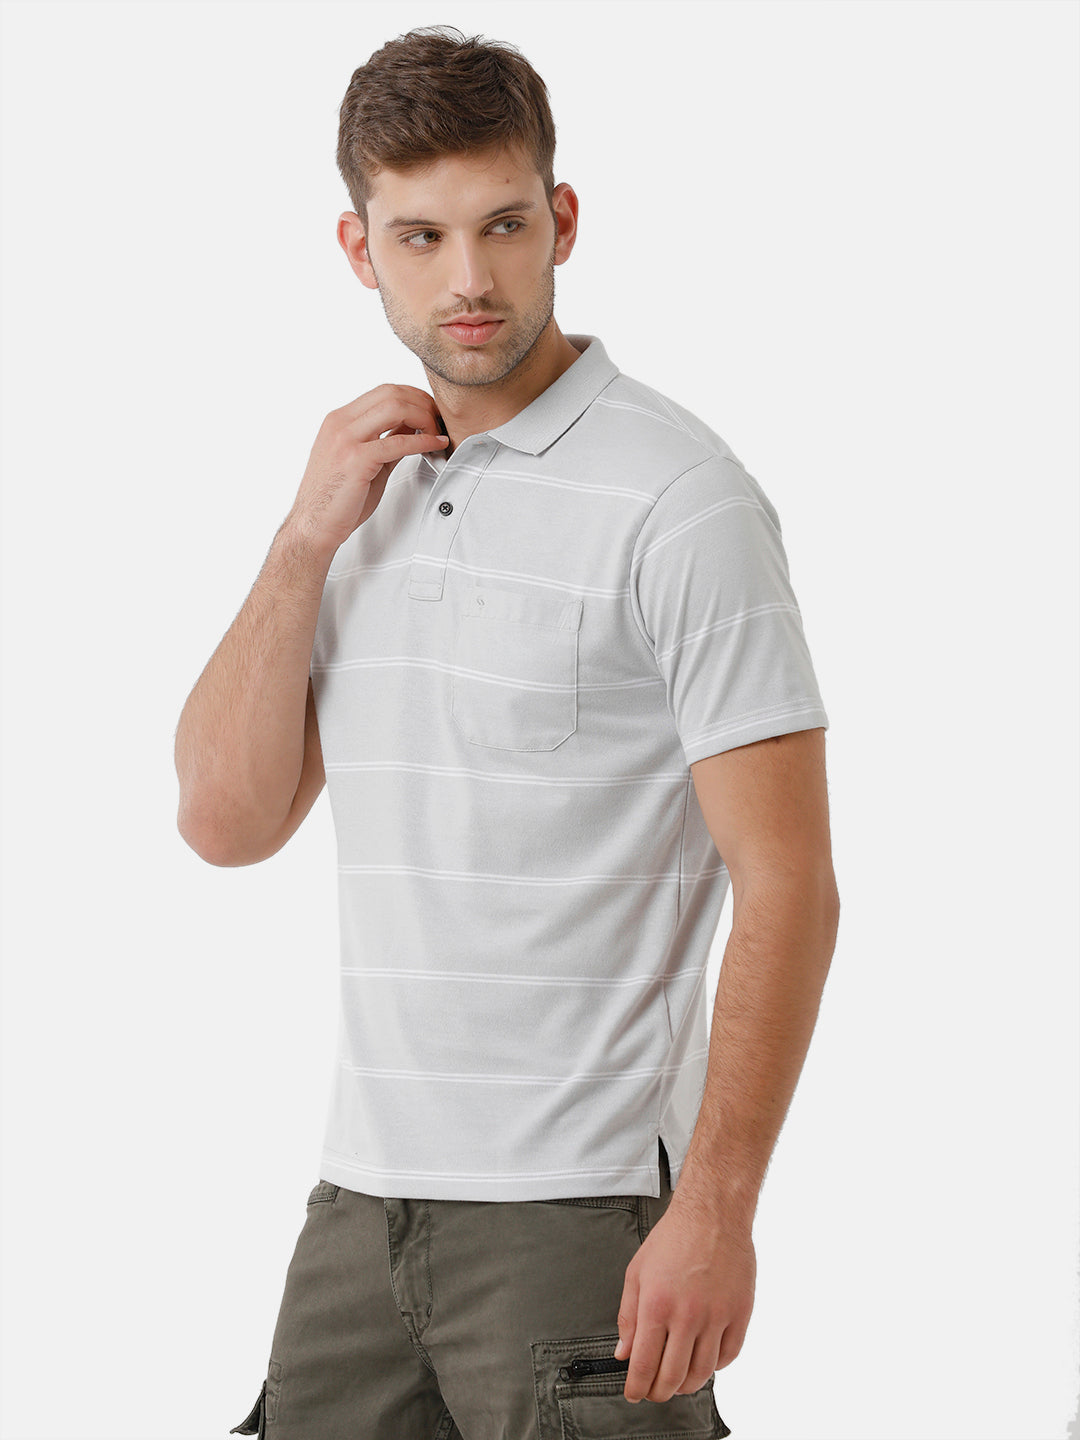 Classic Polo Mens Cotton Blend Striped Half Sleeve Authentic Fit Polo Neck Light Grey Color T-Shirt | Avon 491 B